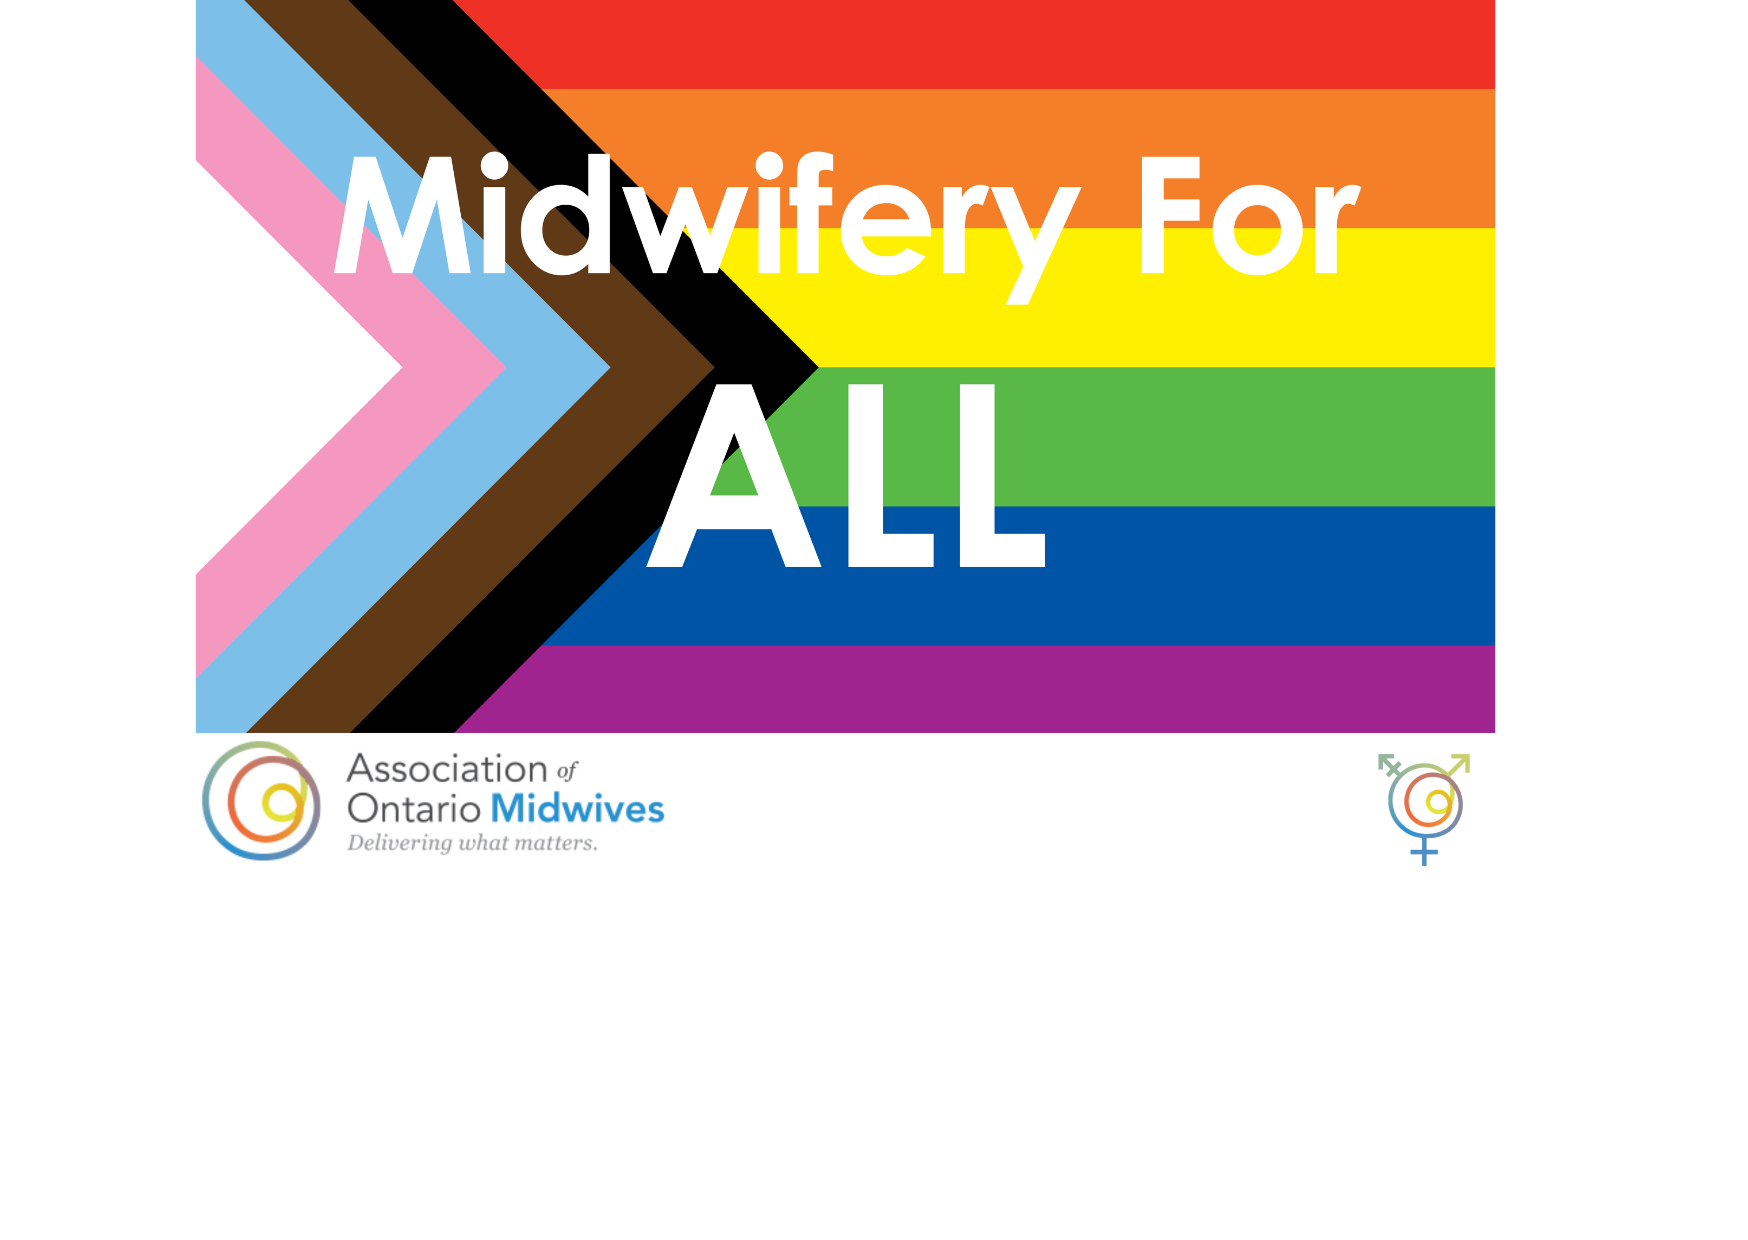 Progress Pride flag with graphic text "Midwifery For ALL" and AOM logo